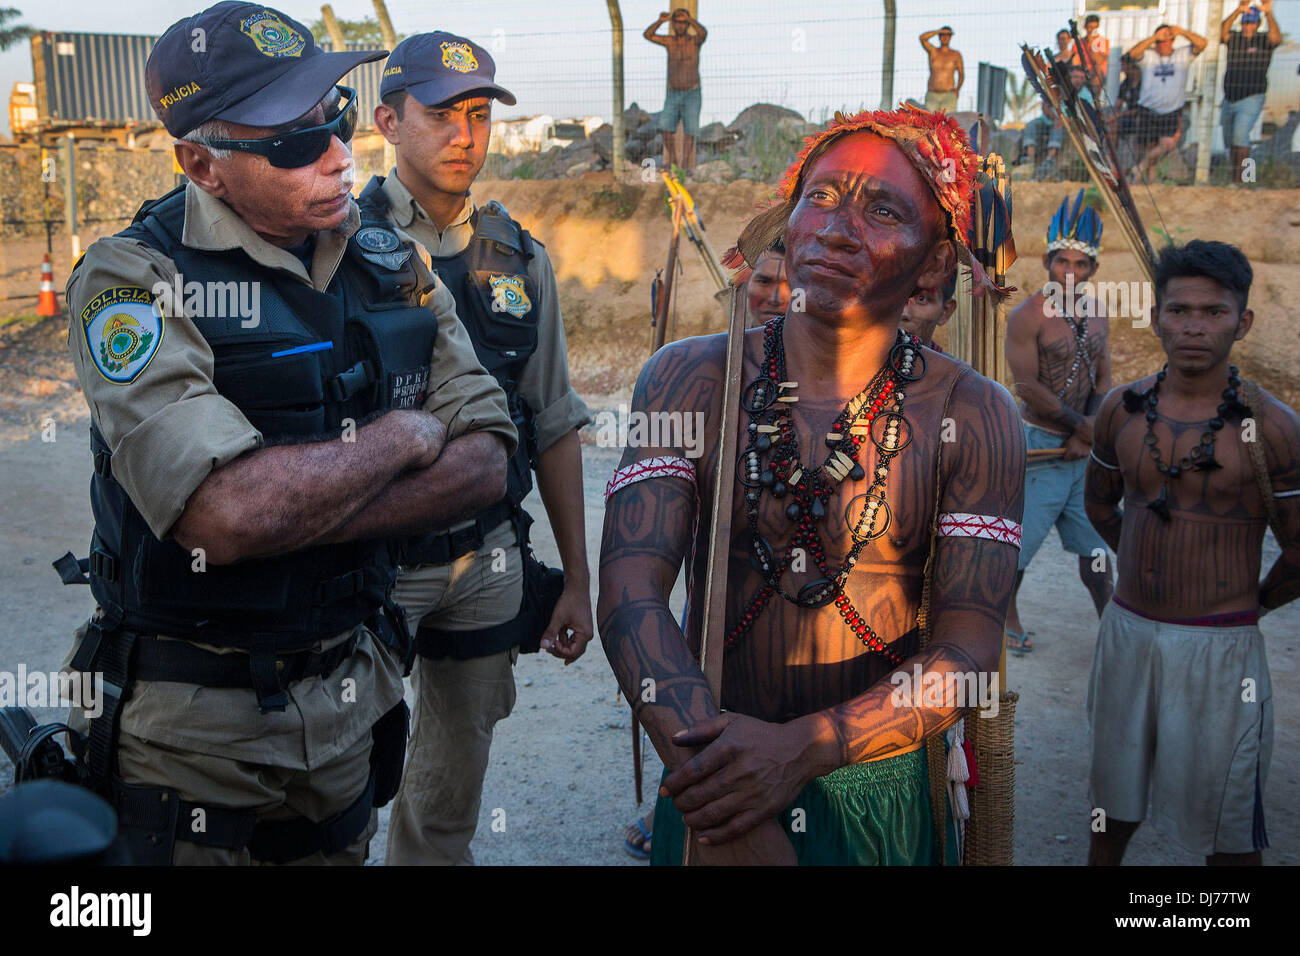 May 28, 2013 - Belo Monte Primary Turbine Const, Para, Brazil - An indigenous Munduruku man and member of the Federal Police argue during an occupation of the Belo Monte Dam. The Belo Monte is the first of a series of dams planned across the Amazon, and the Munduruku have come from the Tapajos River to protest several planned dams there. On May 27th, an indigenous group made up predominantly of Munduruku occupied Belo Monte and halted construction on the main turbine site. Xikrin people live on the Bacaja, a tributary of the Xingu River, where construction of the Belo Monte Dam is reaching pea Stock Photo